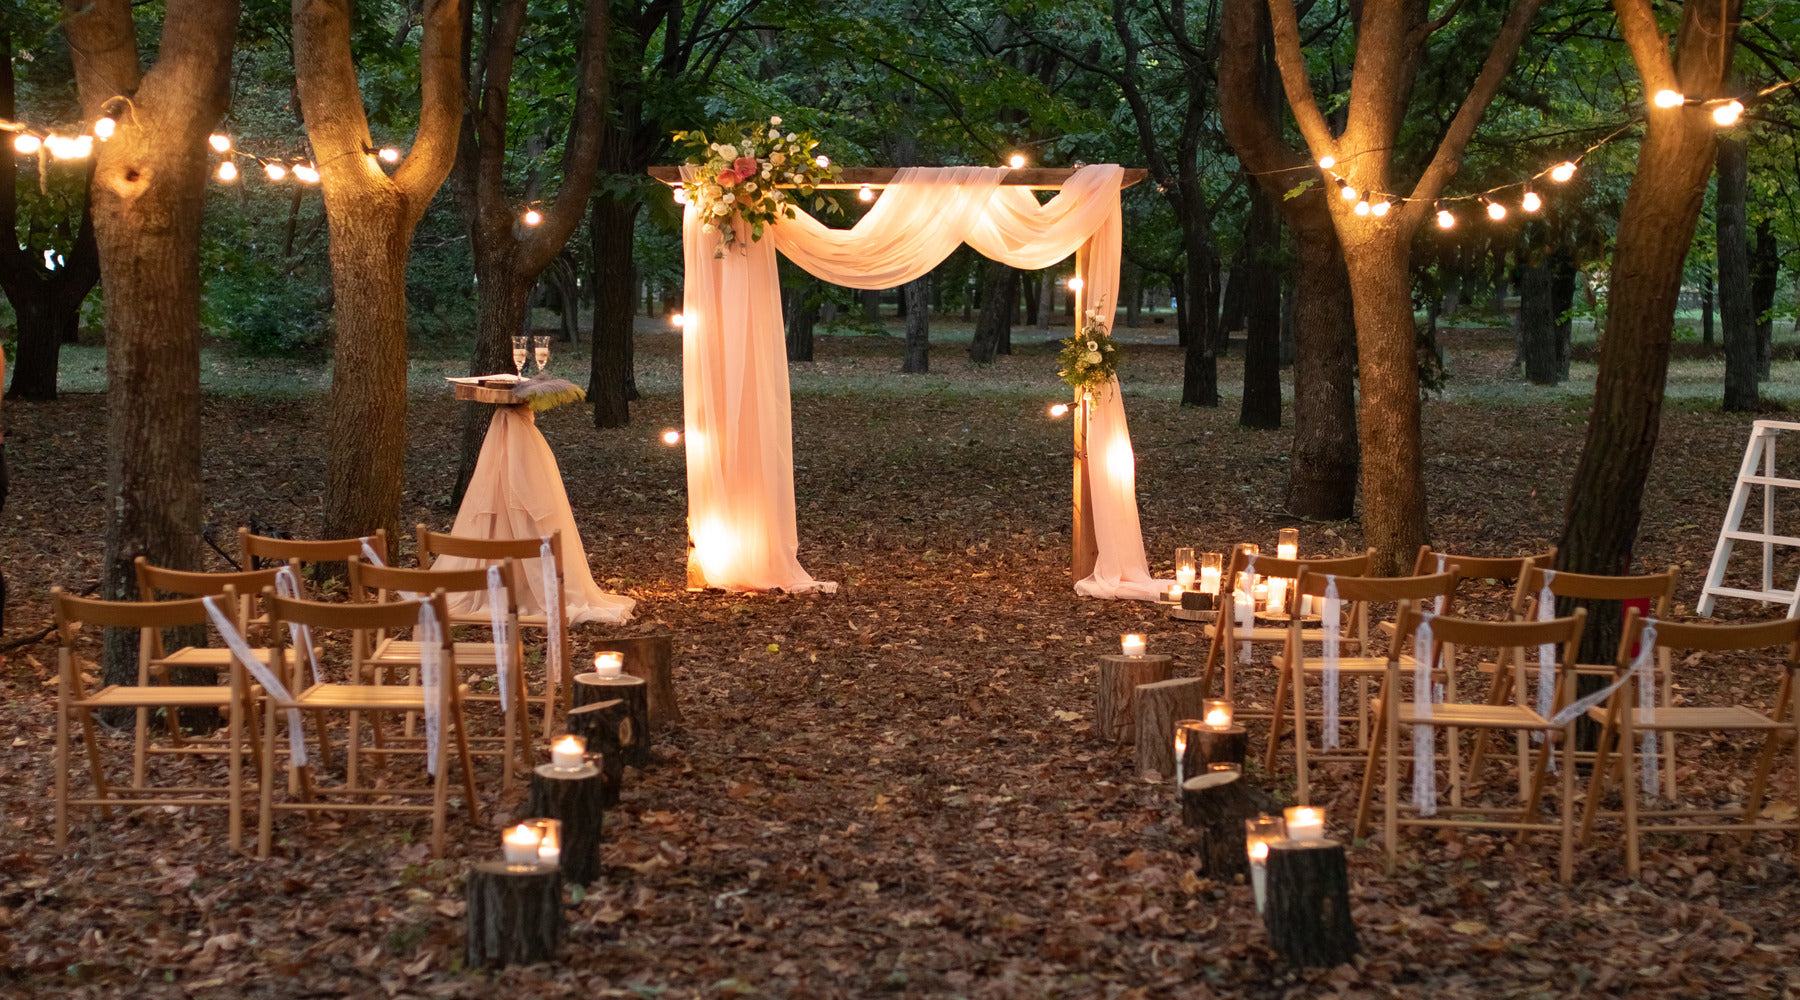 Outdoor string lights illuminating rustic wedding in the forest